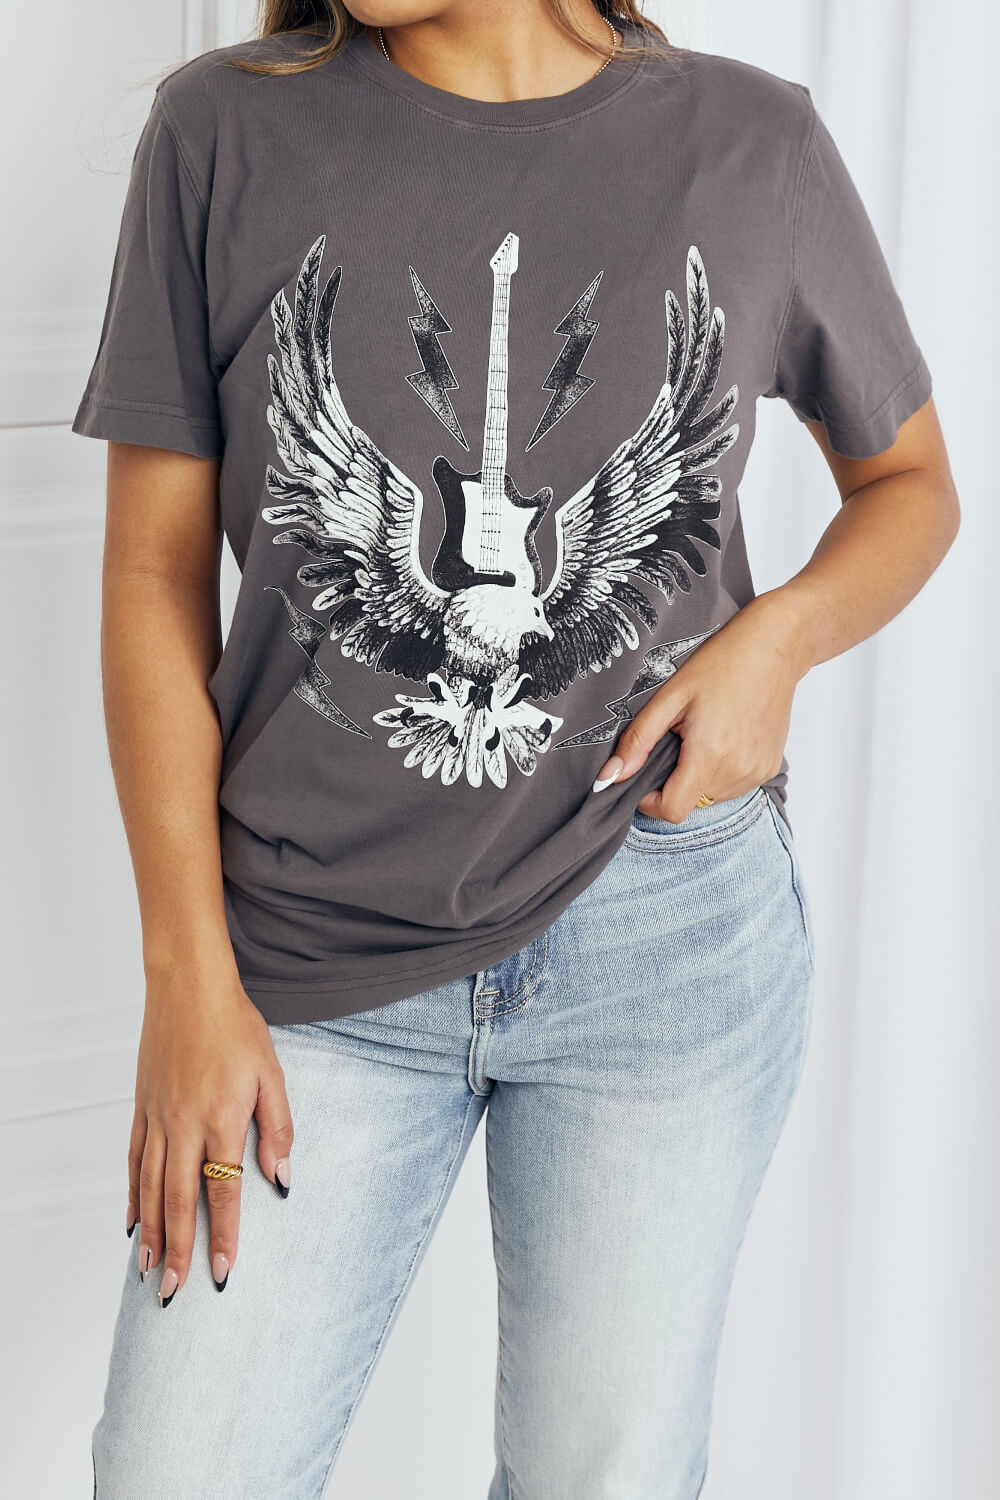 Eagle Graphic Tee Shirt in Charcoal